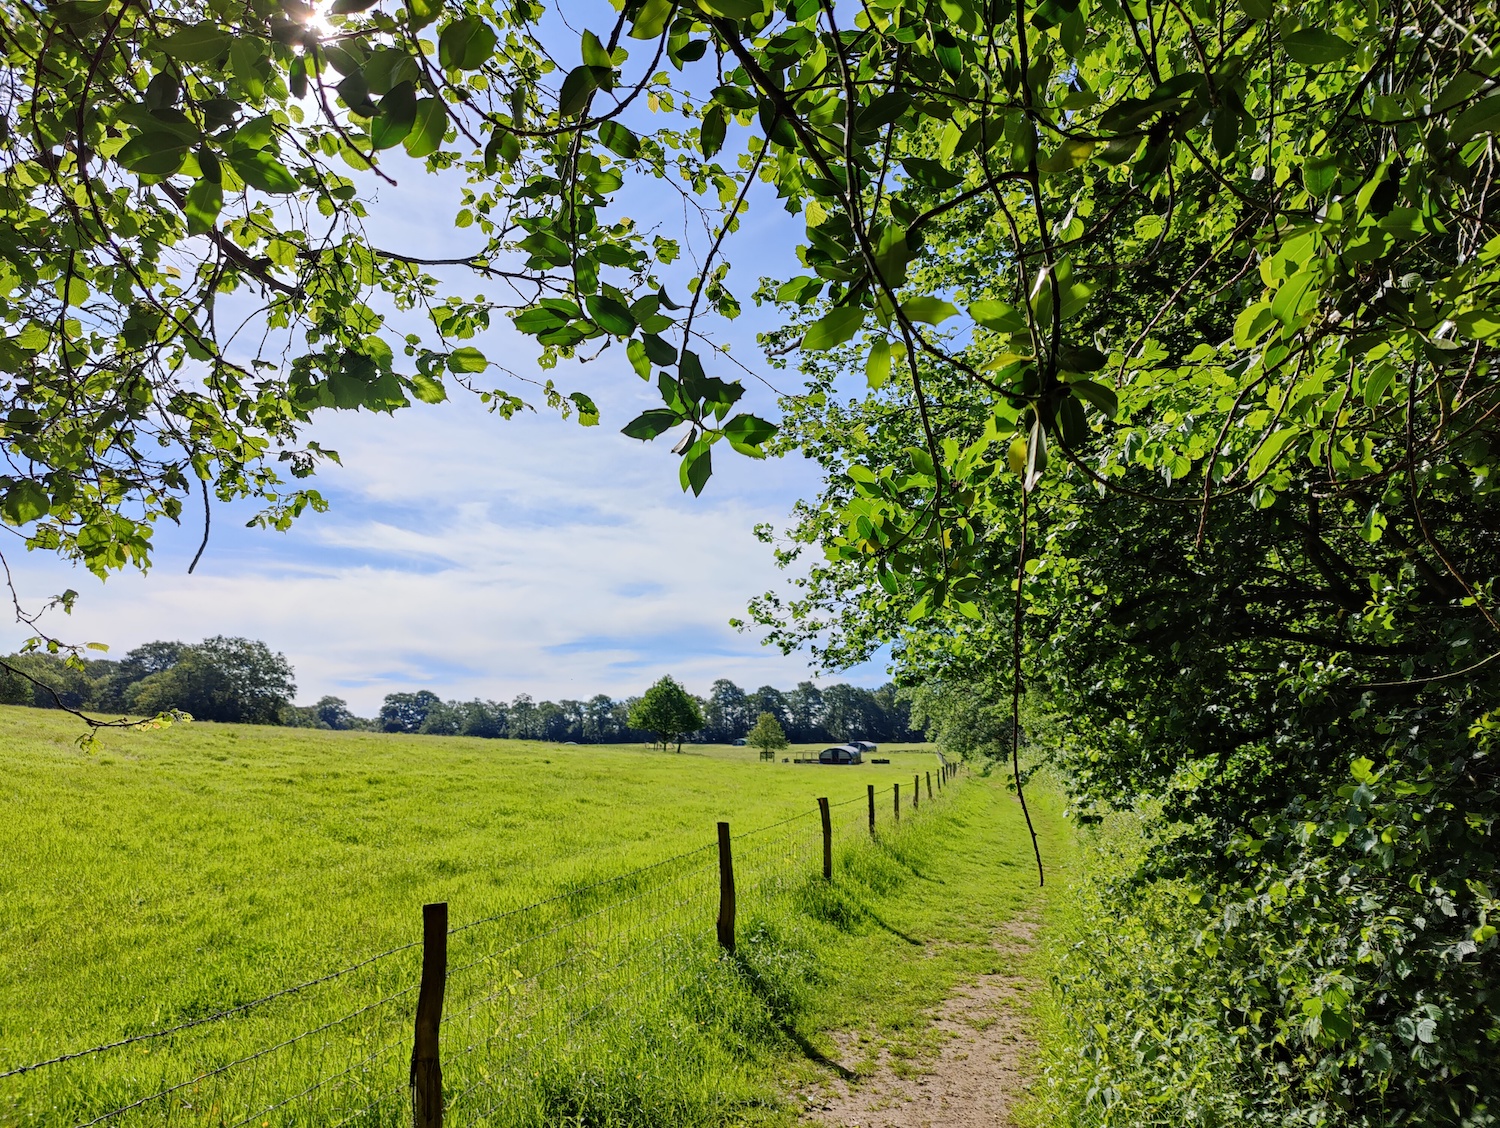 Path and field scene photo taken with the OnePlus 9 Pro